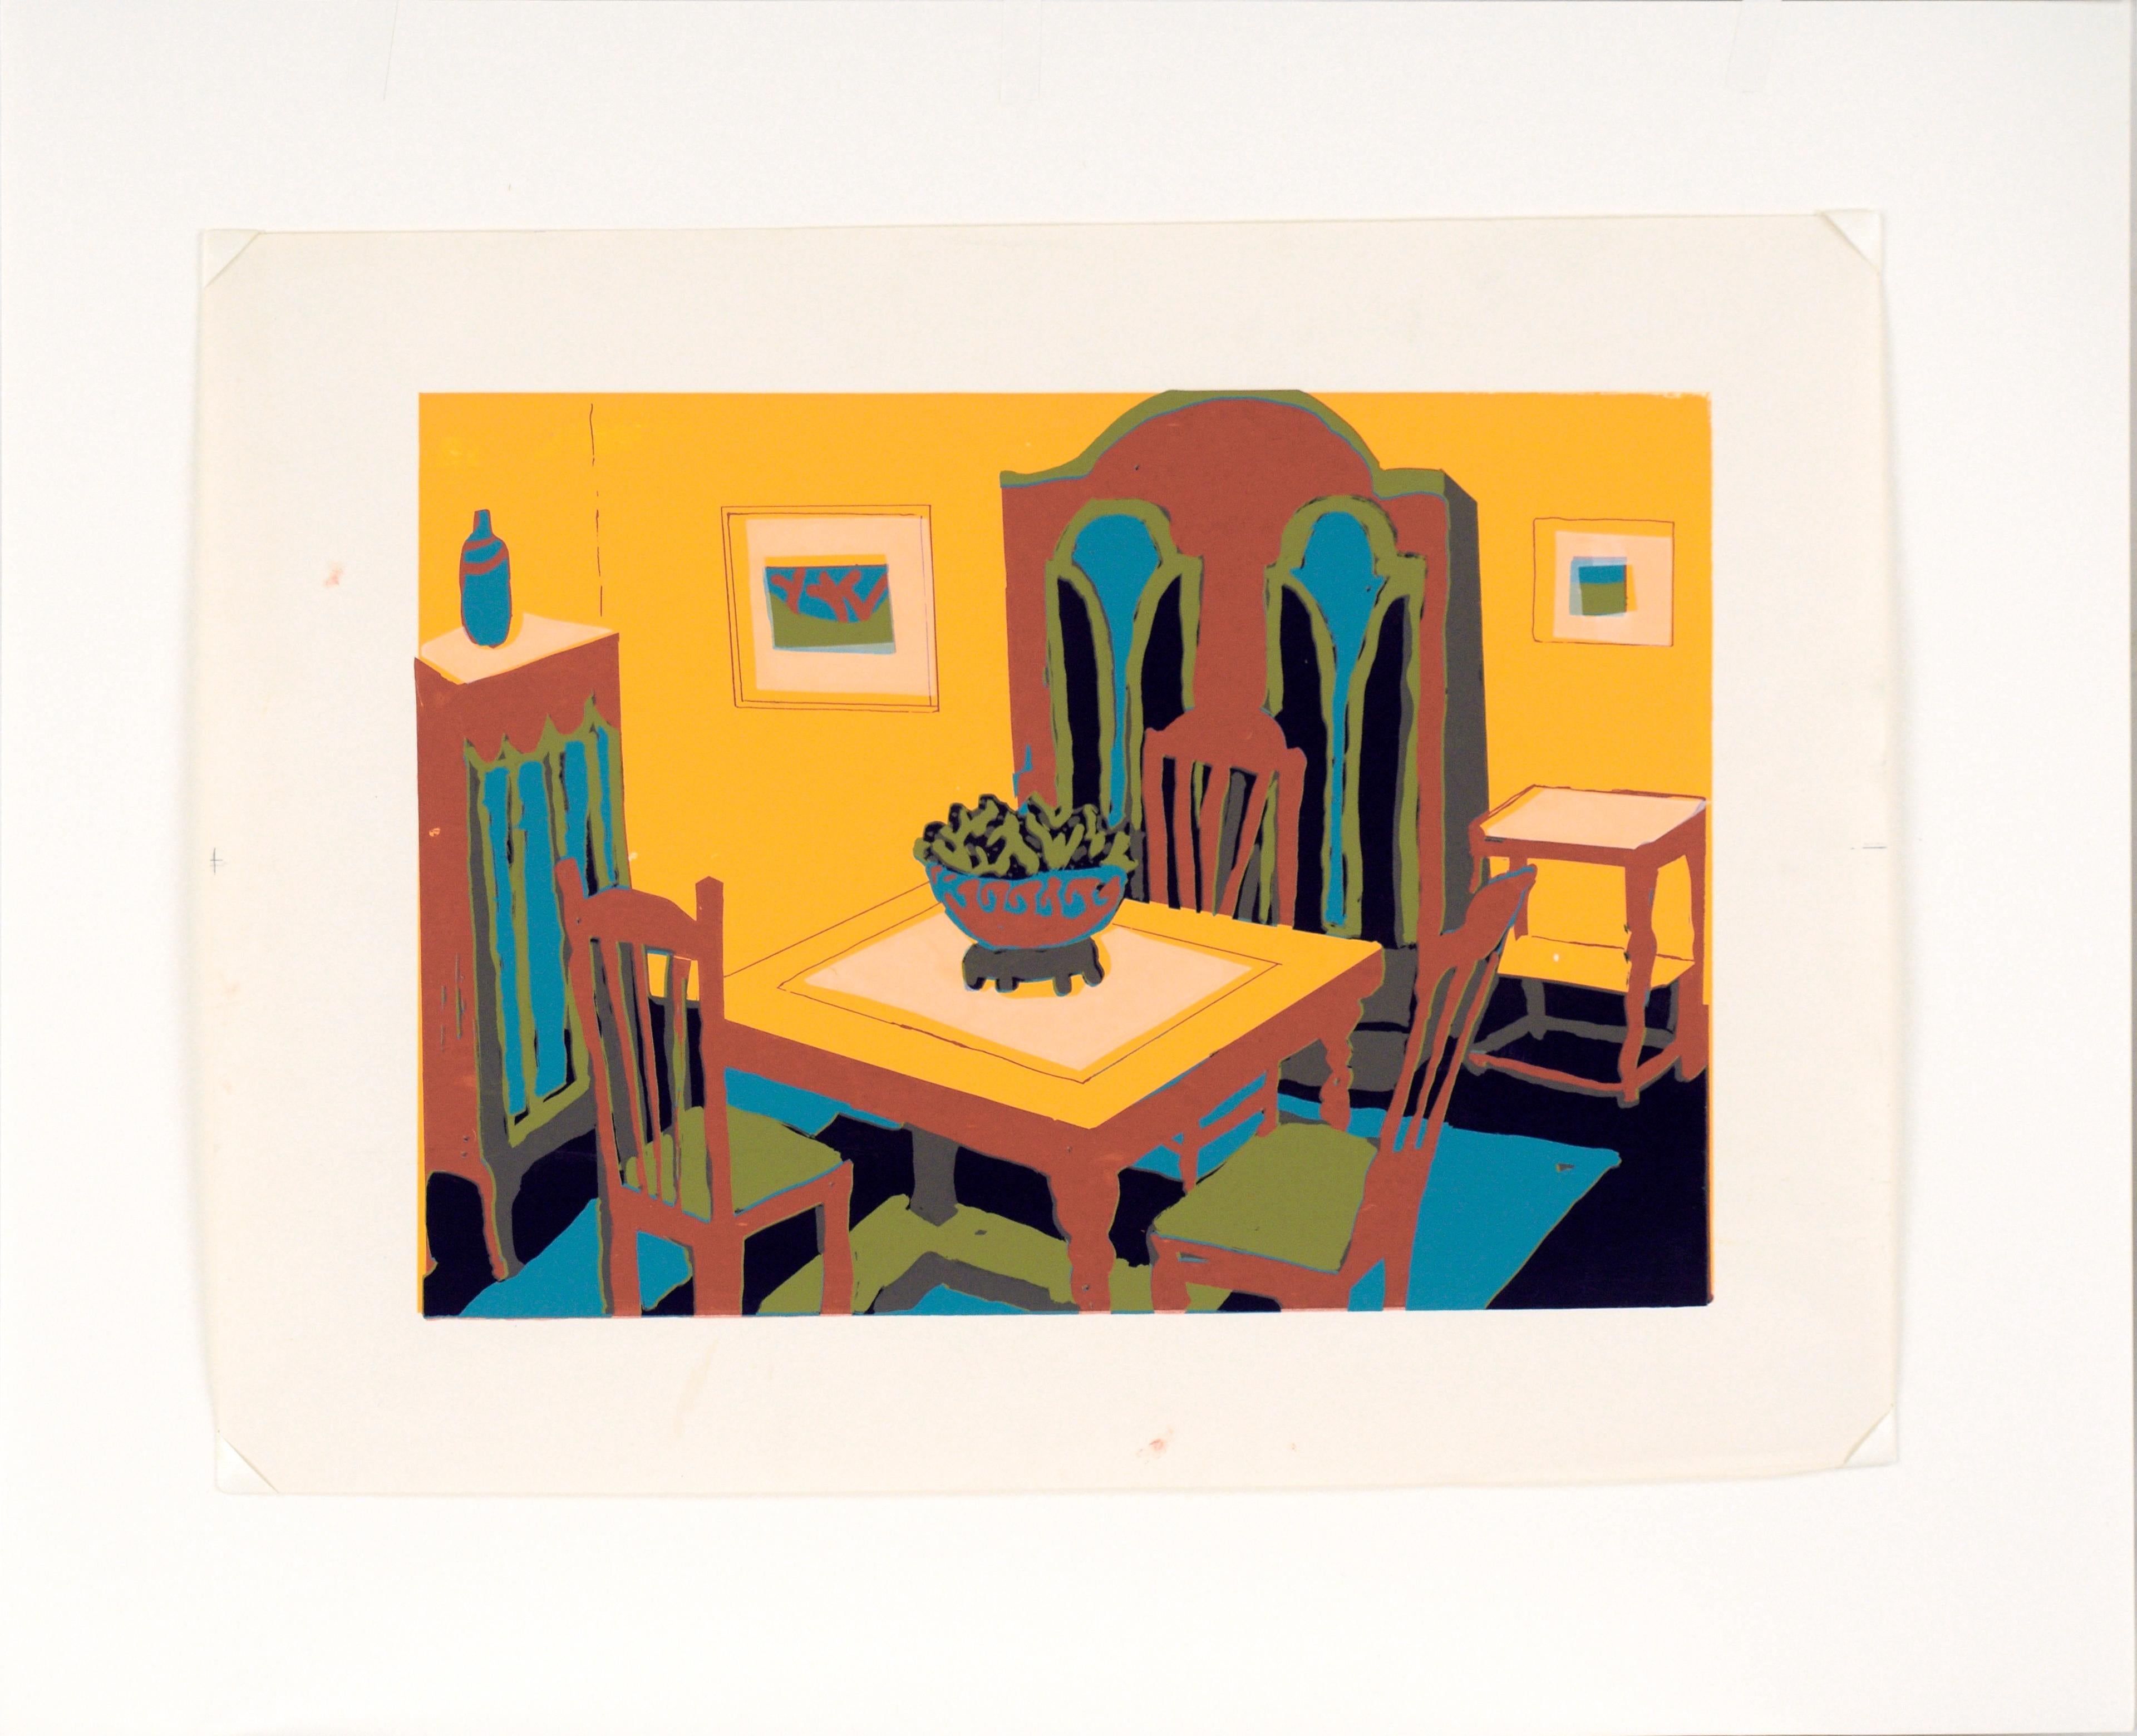 Bold and bright depiction of a dining room by Virginia J Hughins (Virginia Brubaker DeWolf) (American, 1923-2004). The scene is composed of chunky, rectilinear forms, creating an animated or cell-shaded appearance, with a minimalist